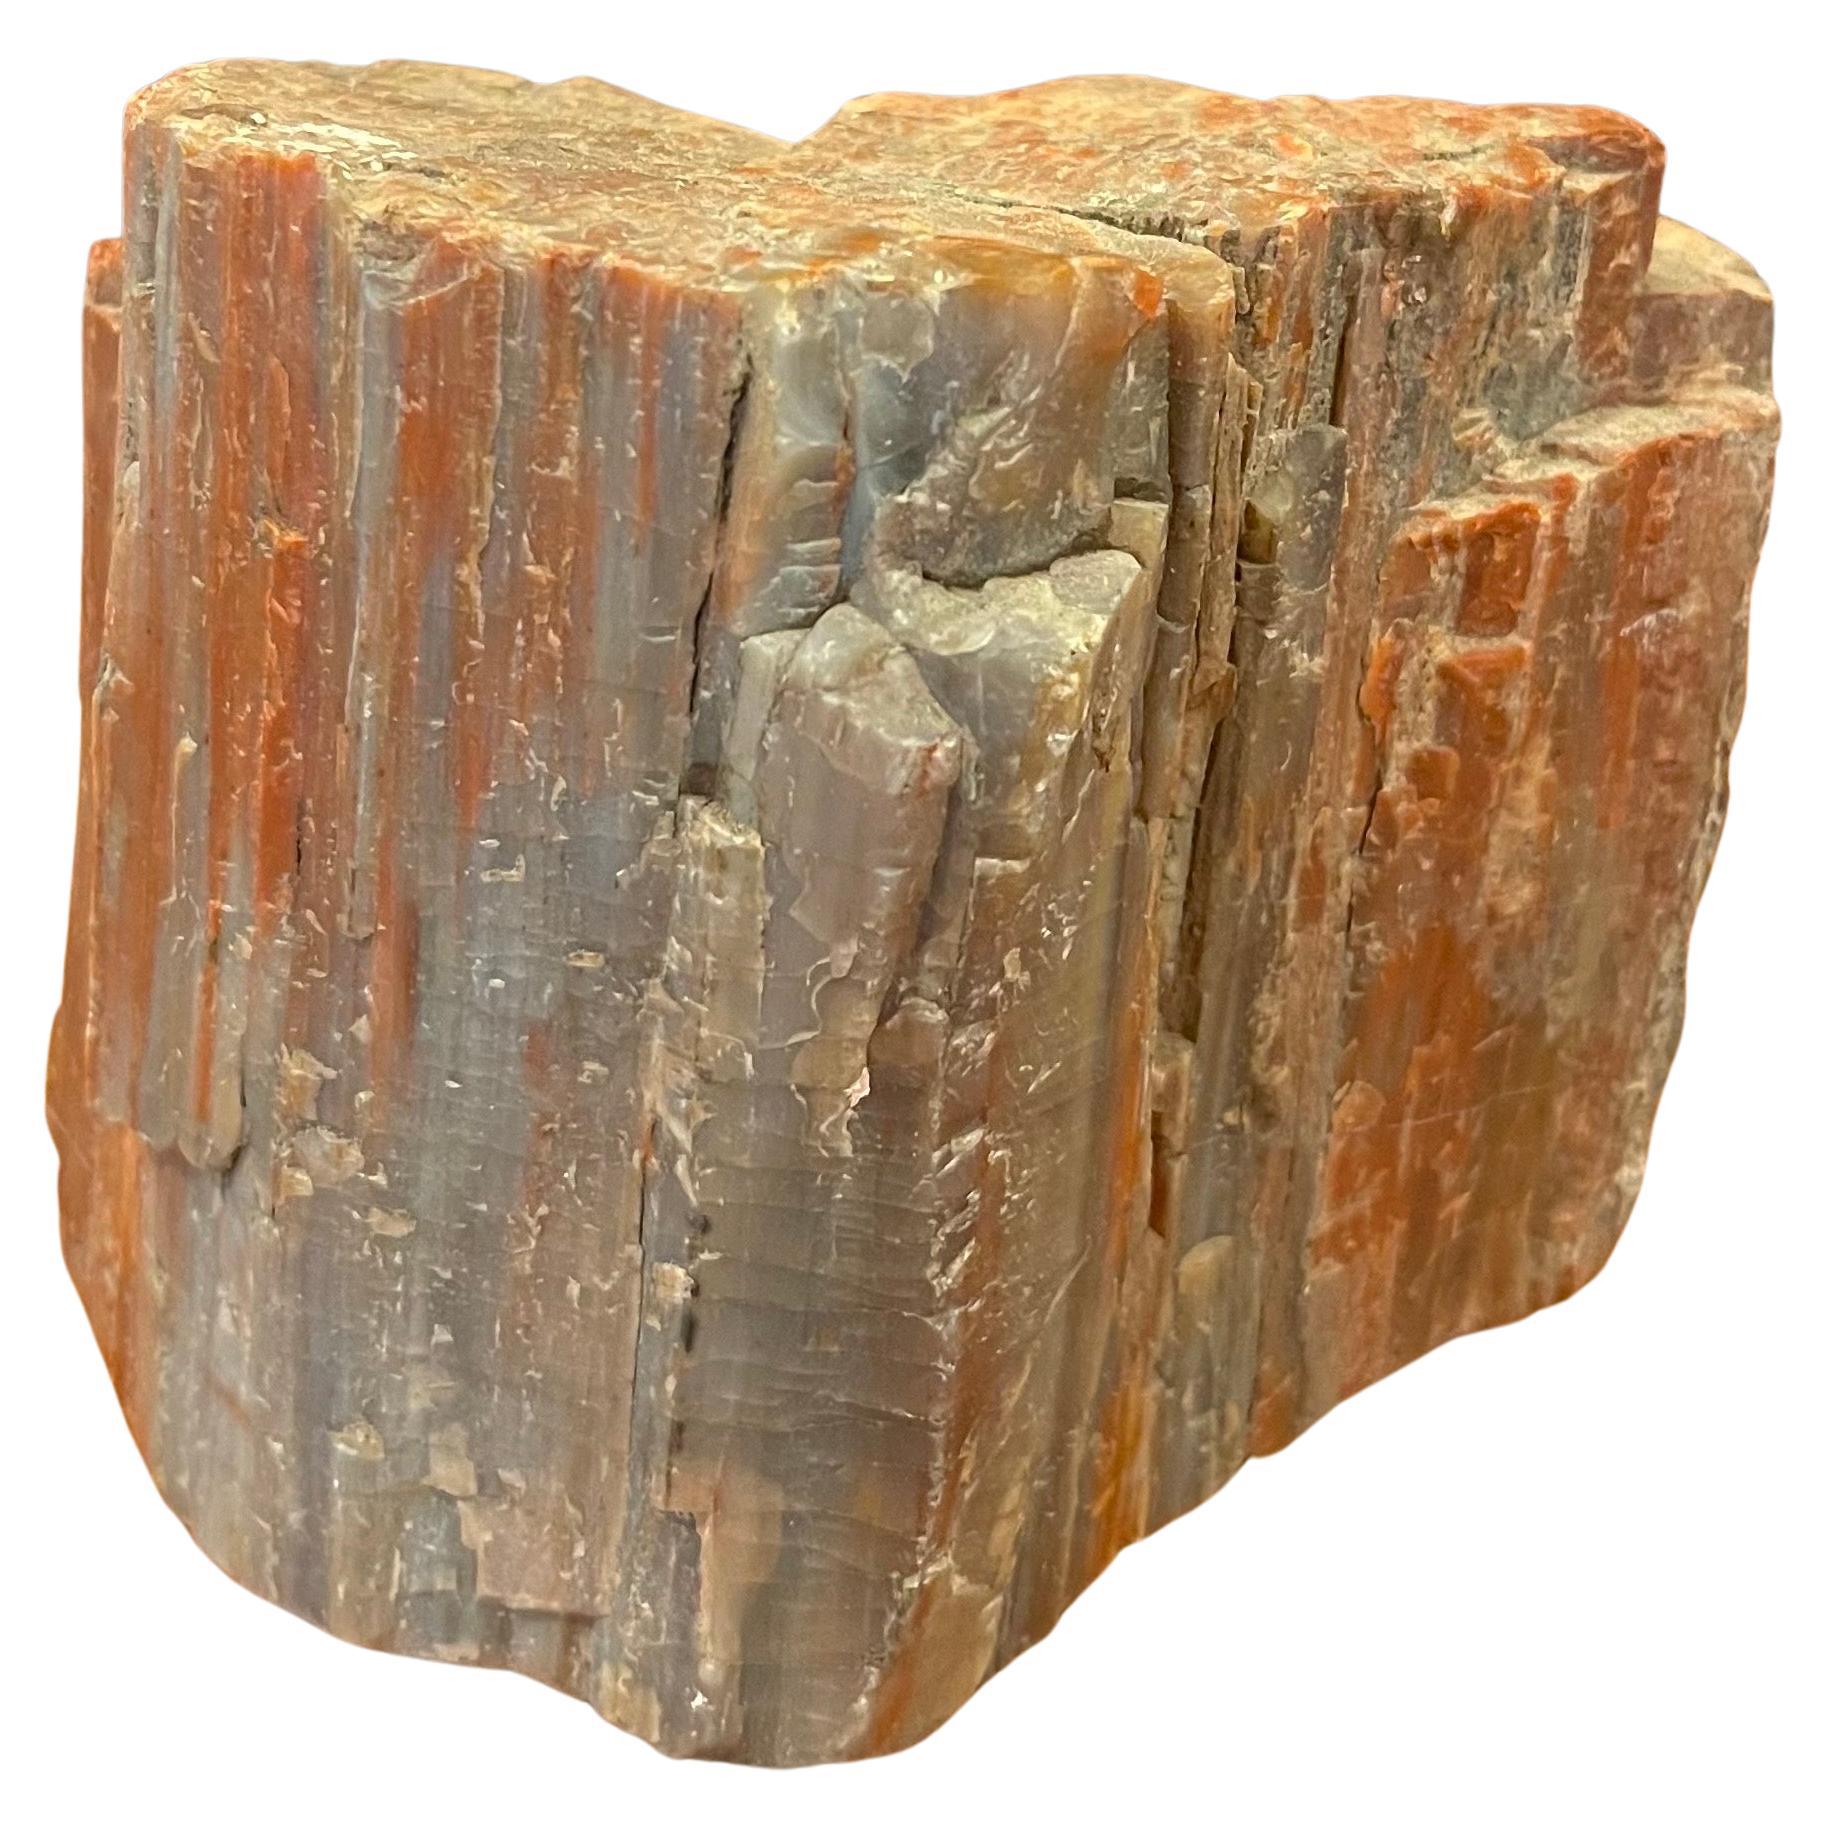 A very nice vintage petrified wood paper weight, circa 1960s. The piece is in very good condition with wonderful brown and tan colors and measures 5